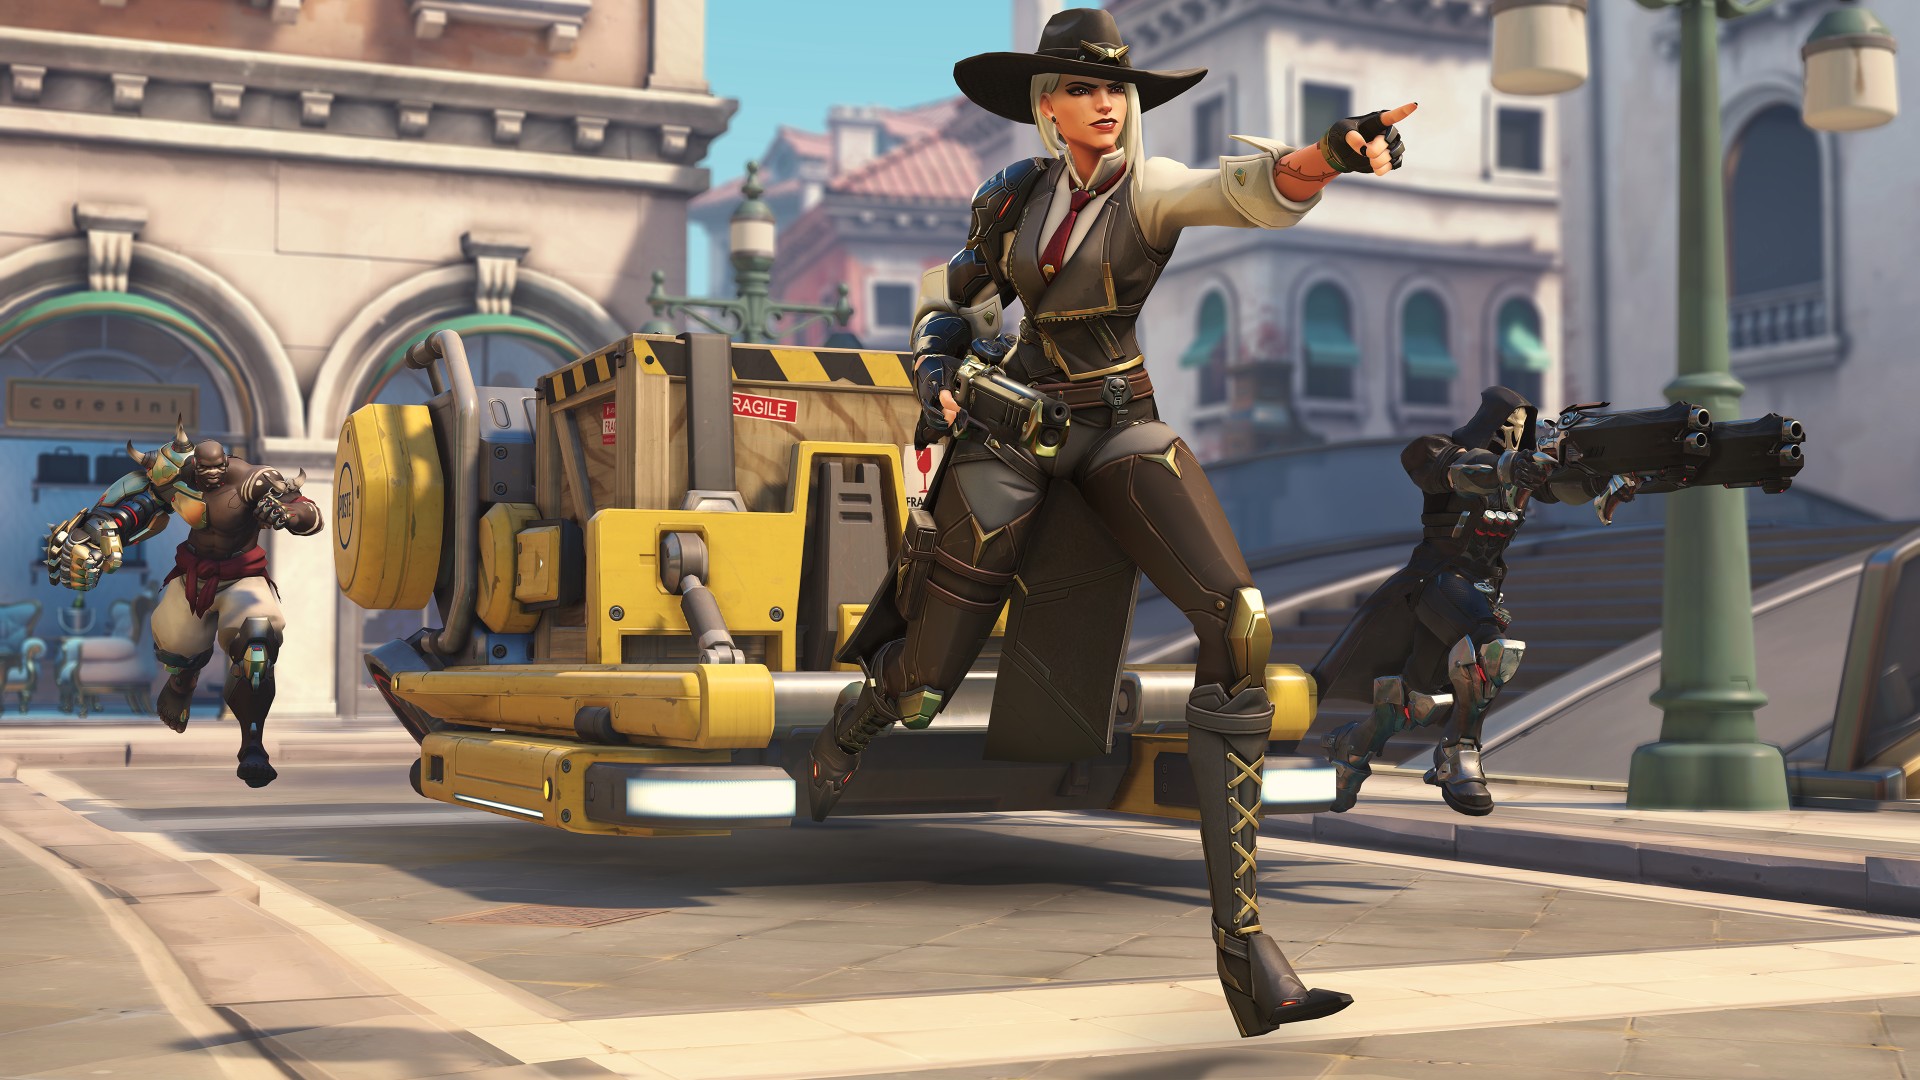 Play the Overwatch Free Trial with Xbox Live Gold Starting November 20